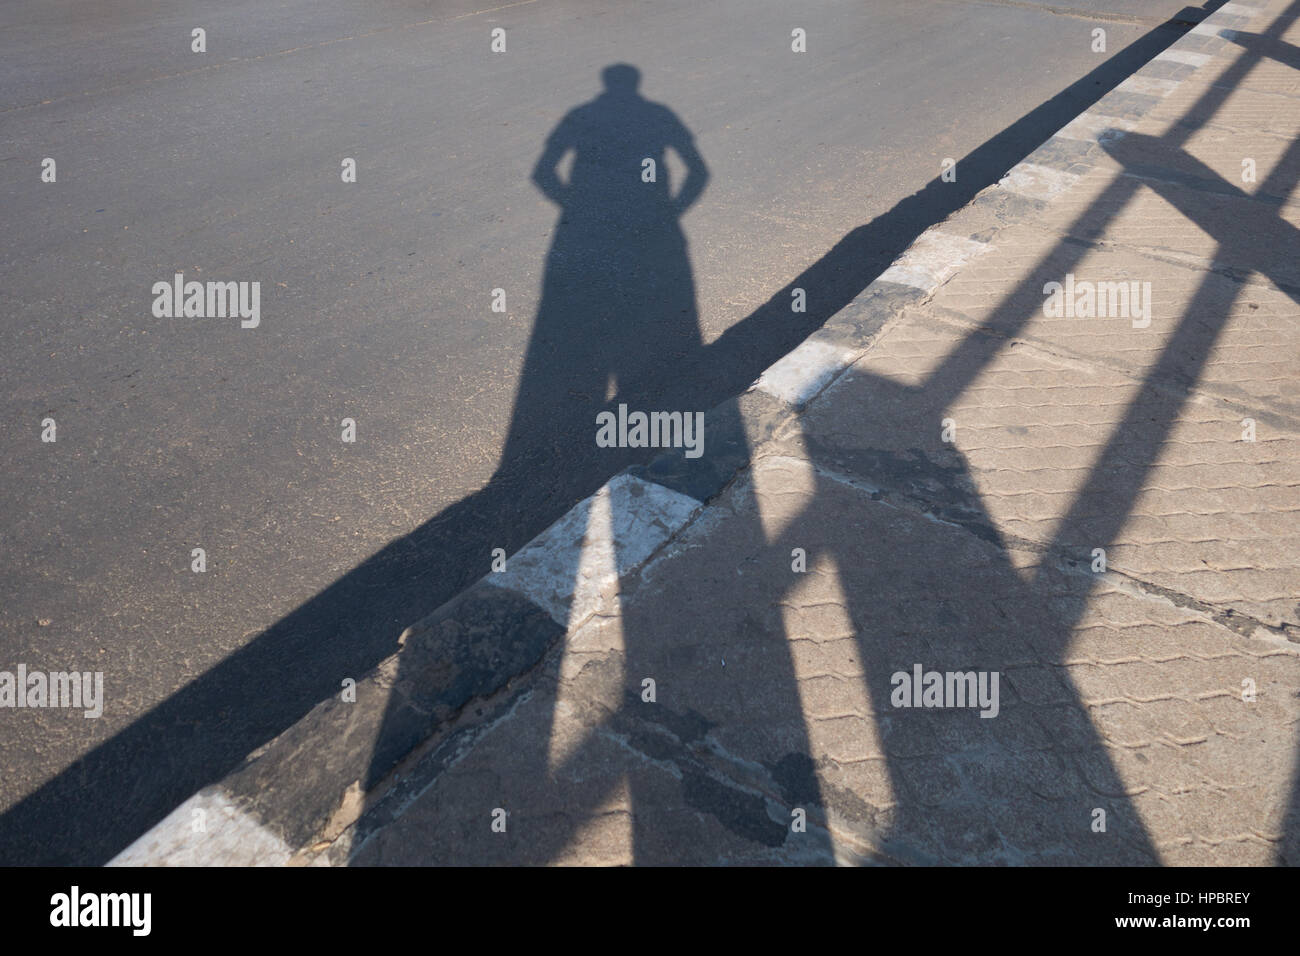 Indian man taking a picture of his own shadow standing on a sidewalk next to railing in Hyderabad,India Stock Photo